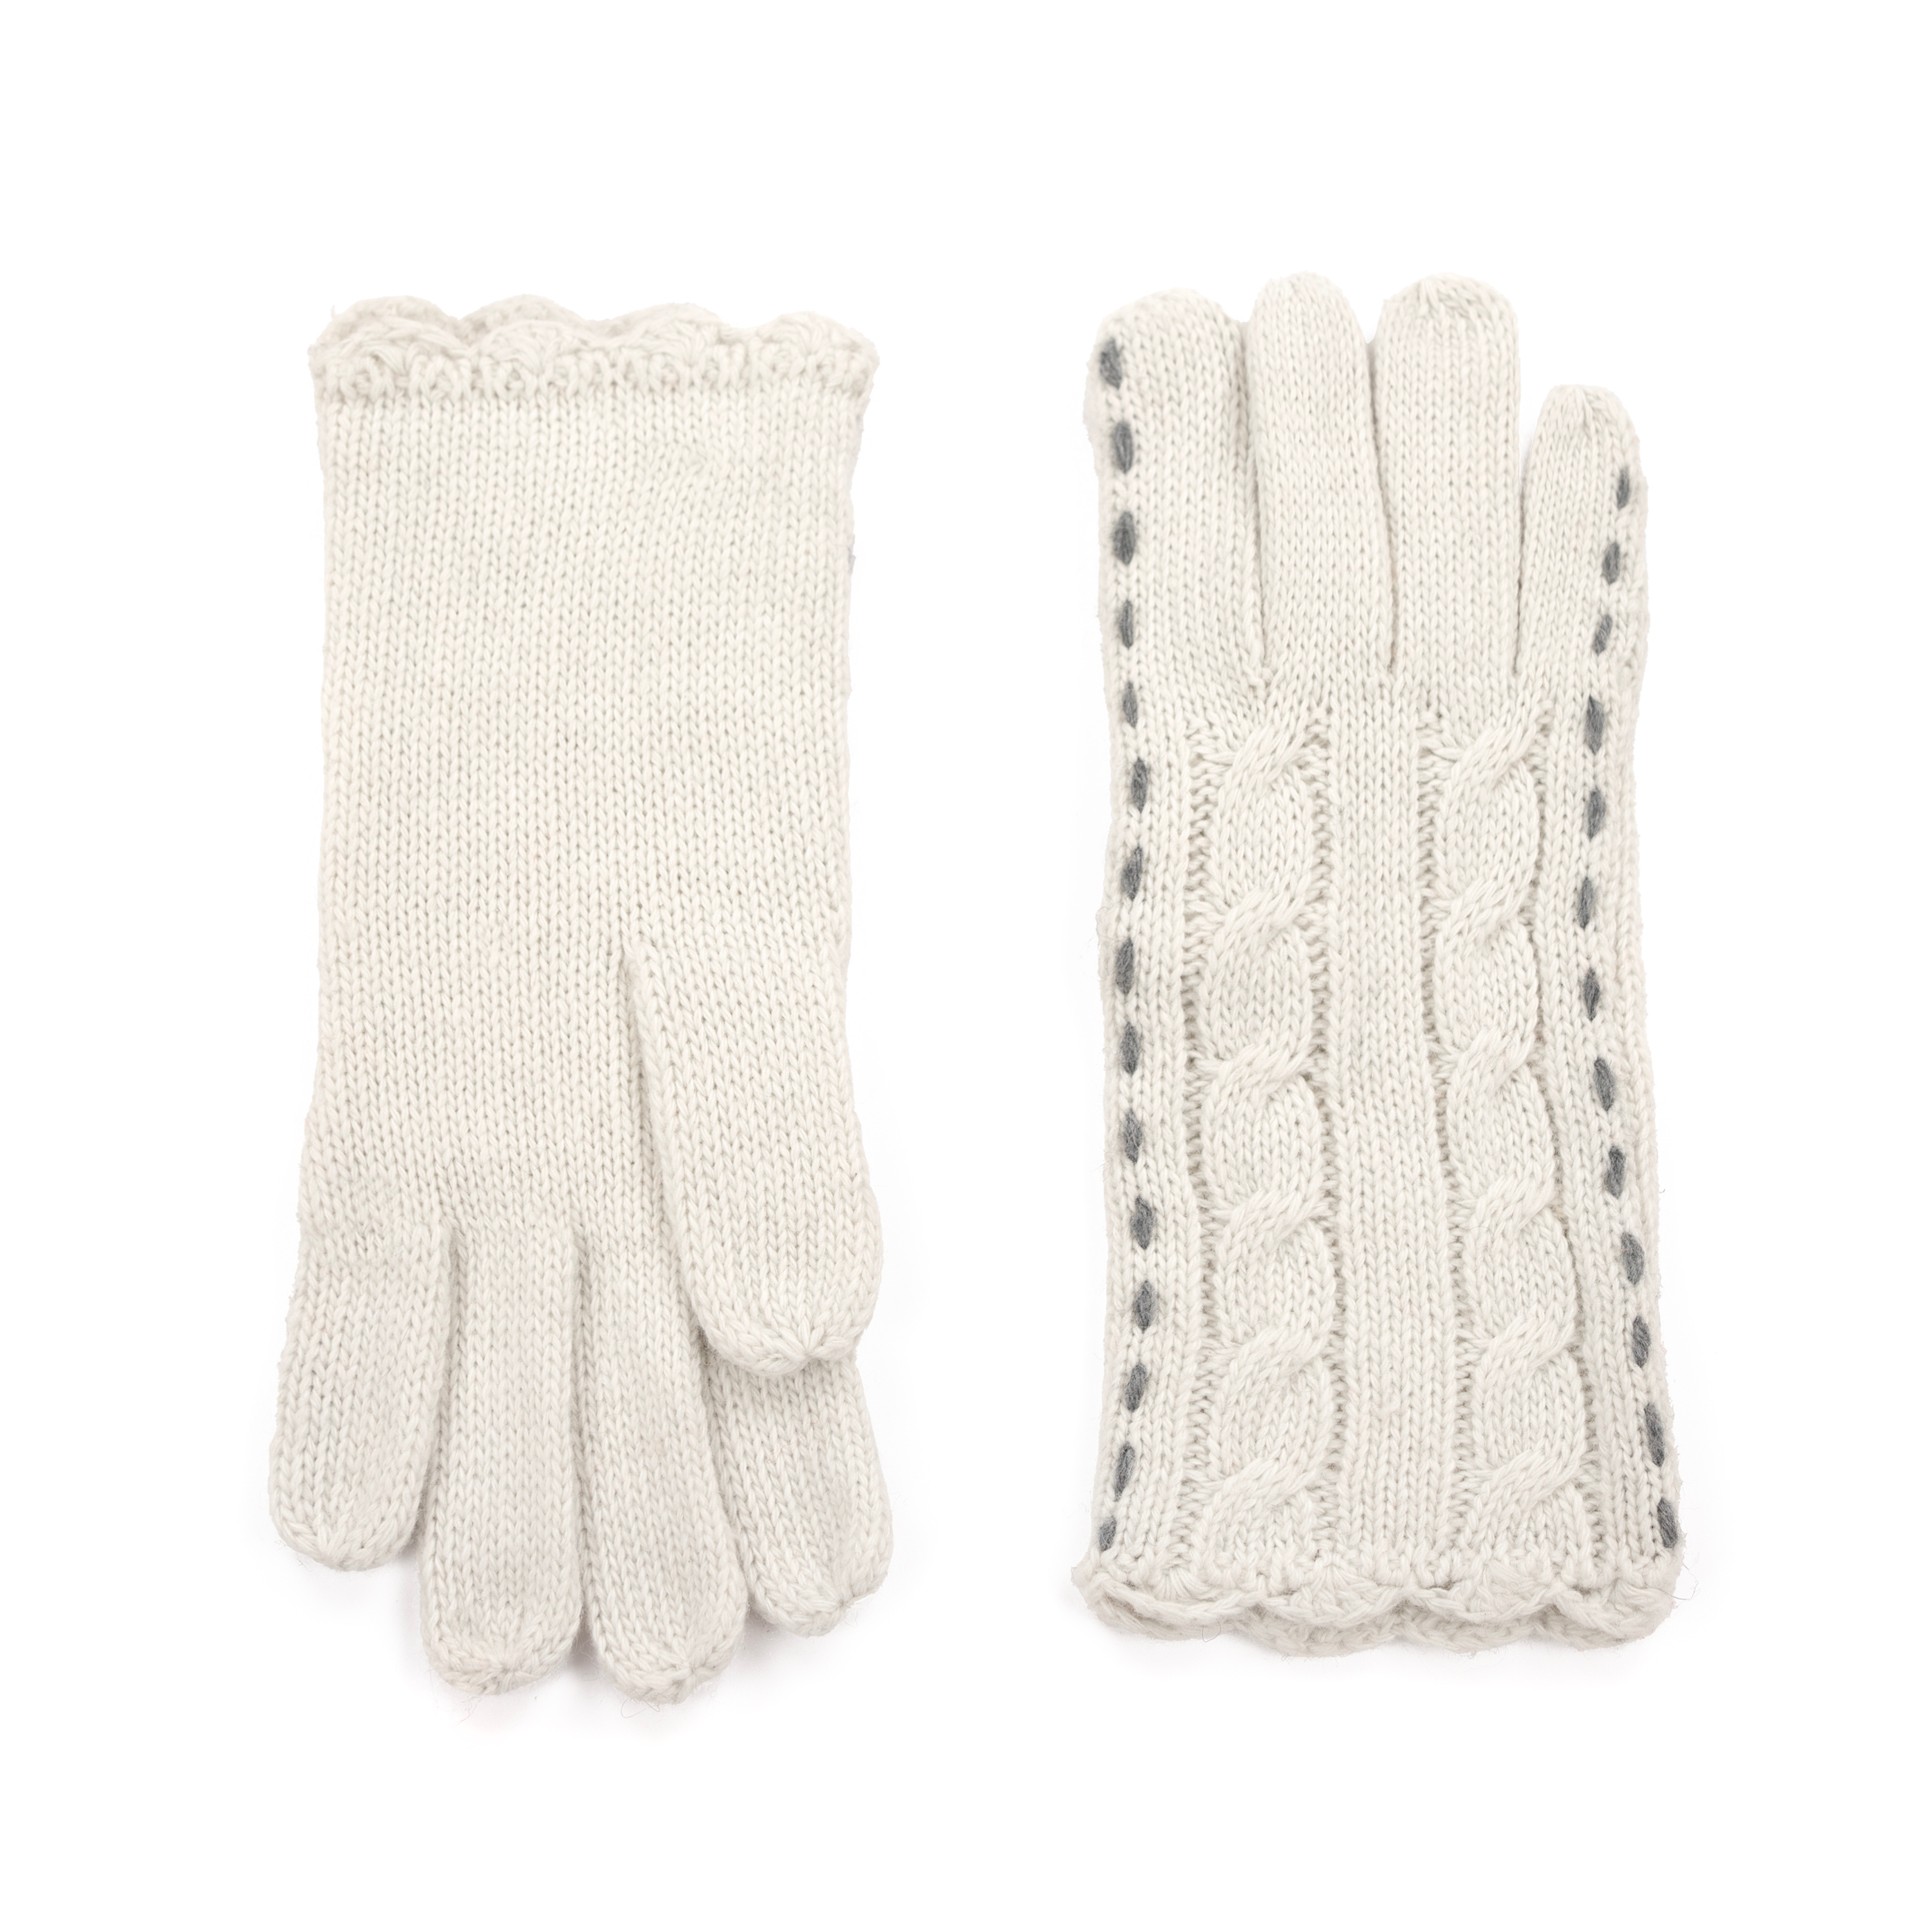 Art Of Polo Woman's Gloves rk13153-7